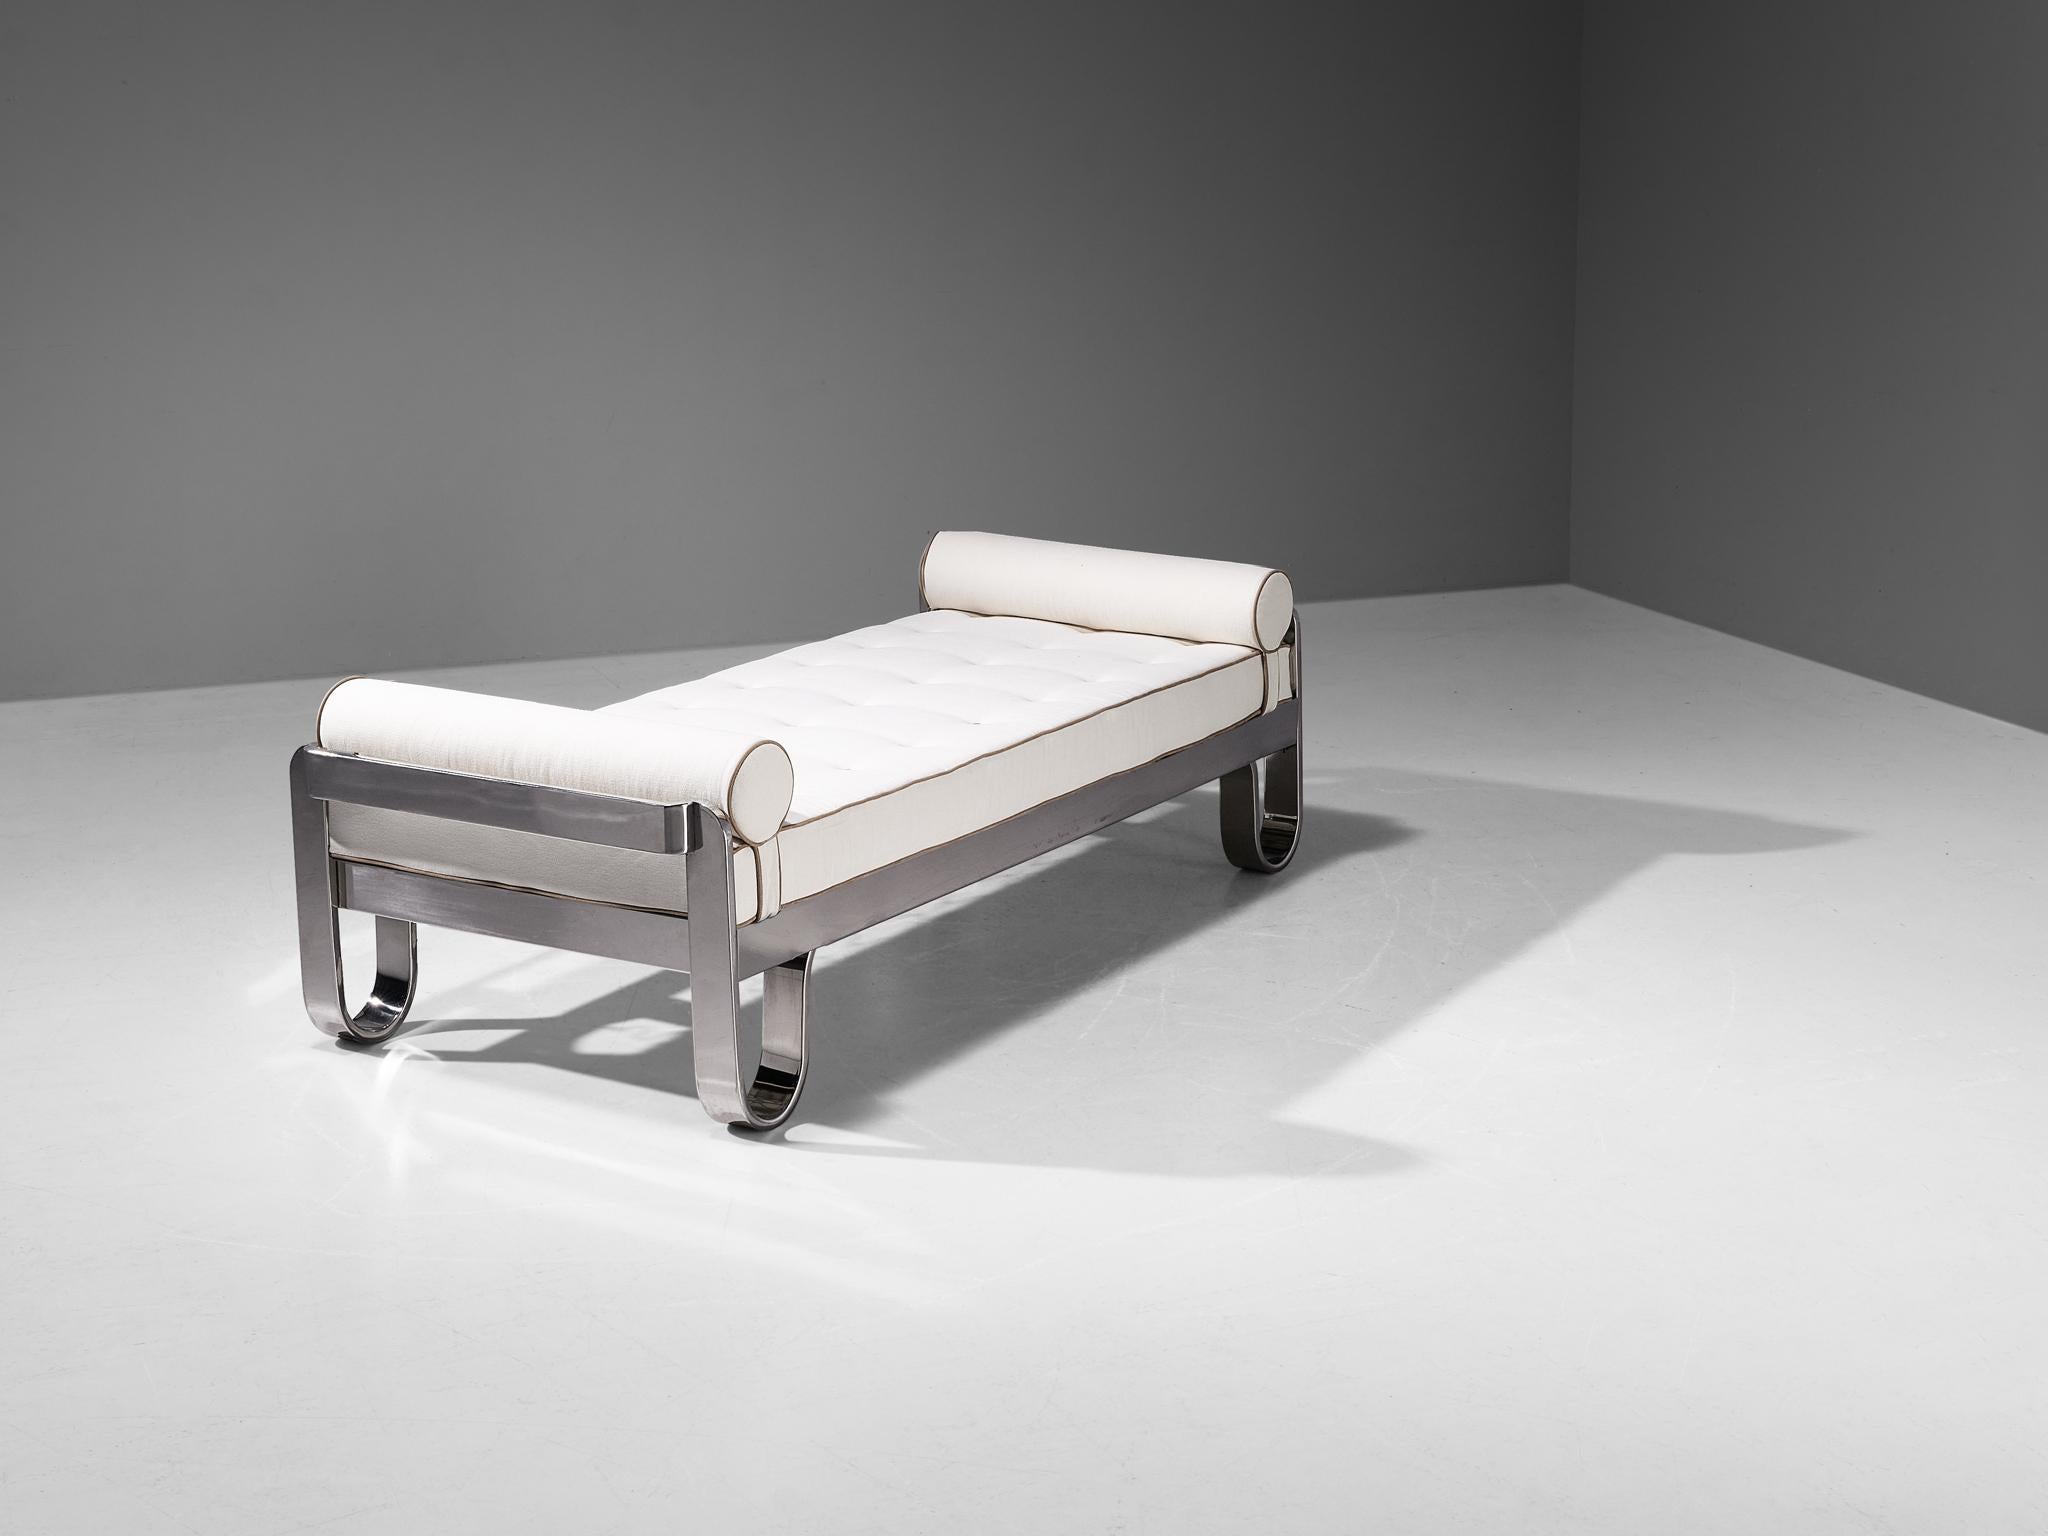 Sergio Chiappa-Catto, Angelo Cortesi & Carlo Torrigiani for Dada Industrial Design, 'Aucuba' bed, chrome-plated metal, Italy, 1976

This extremely rare postmodern bed is created by Sergio Chiappa-Catto, Angelo Cortesi & Carlo Torrigiani, a design